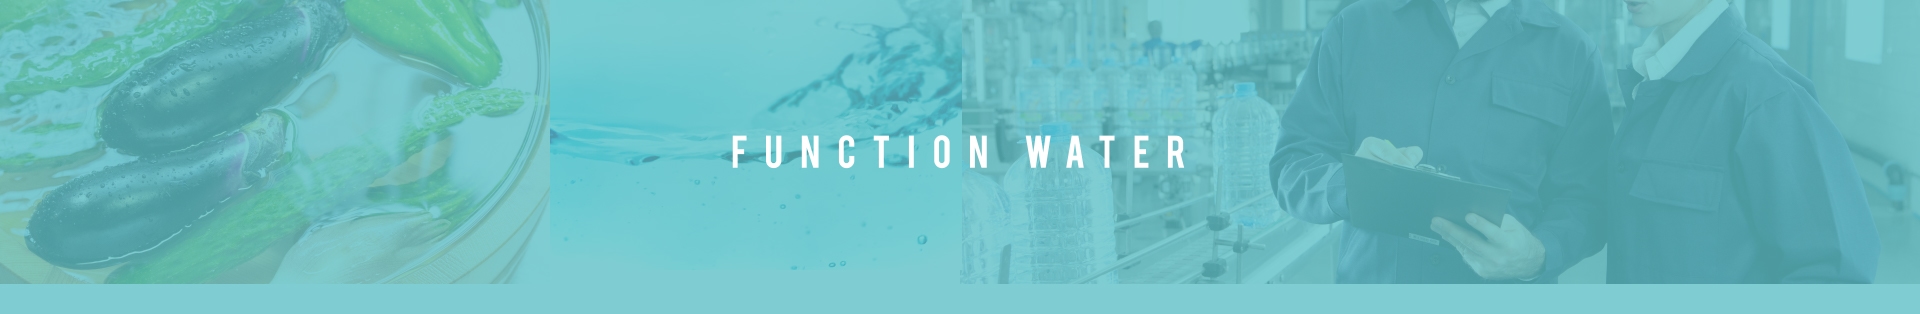 function water